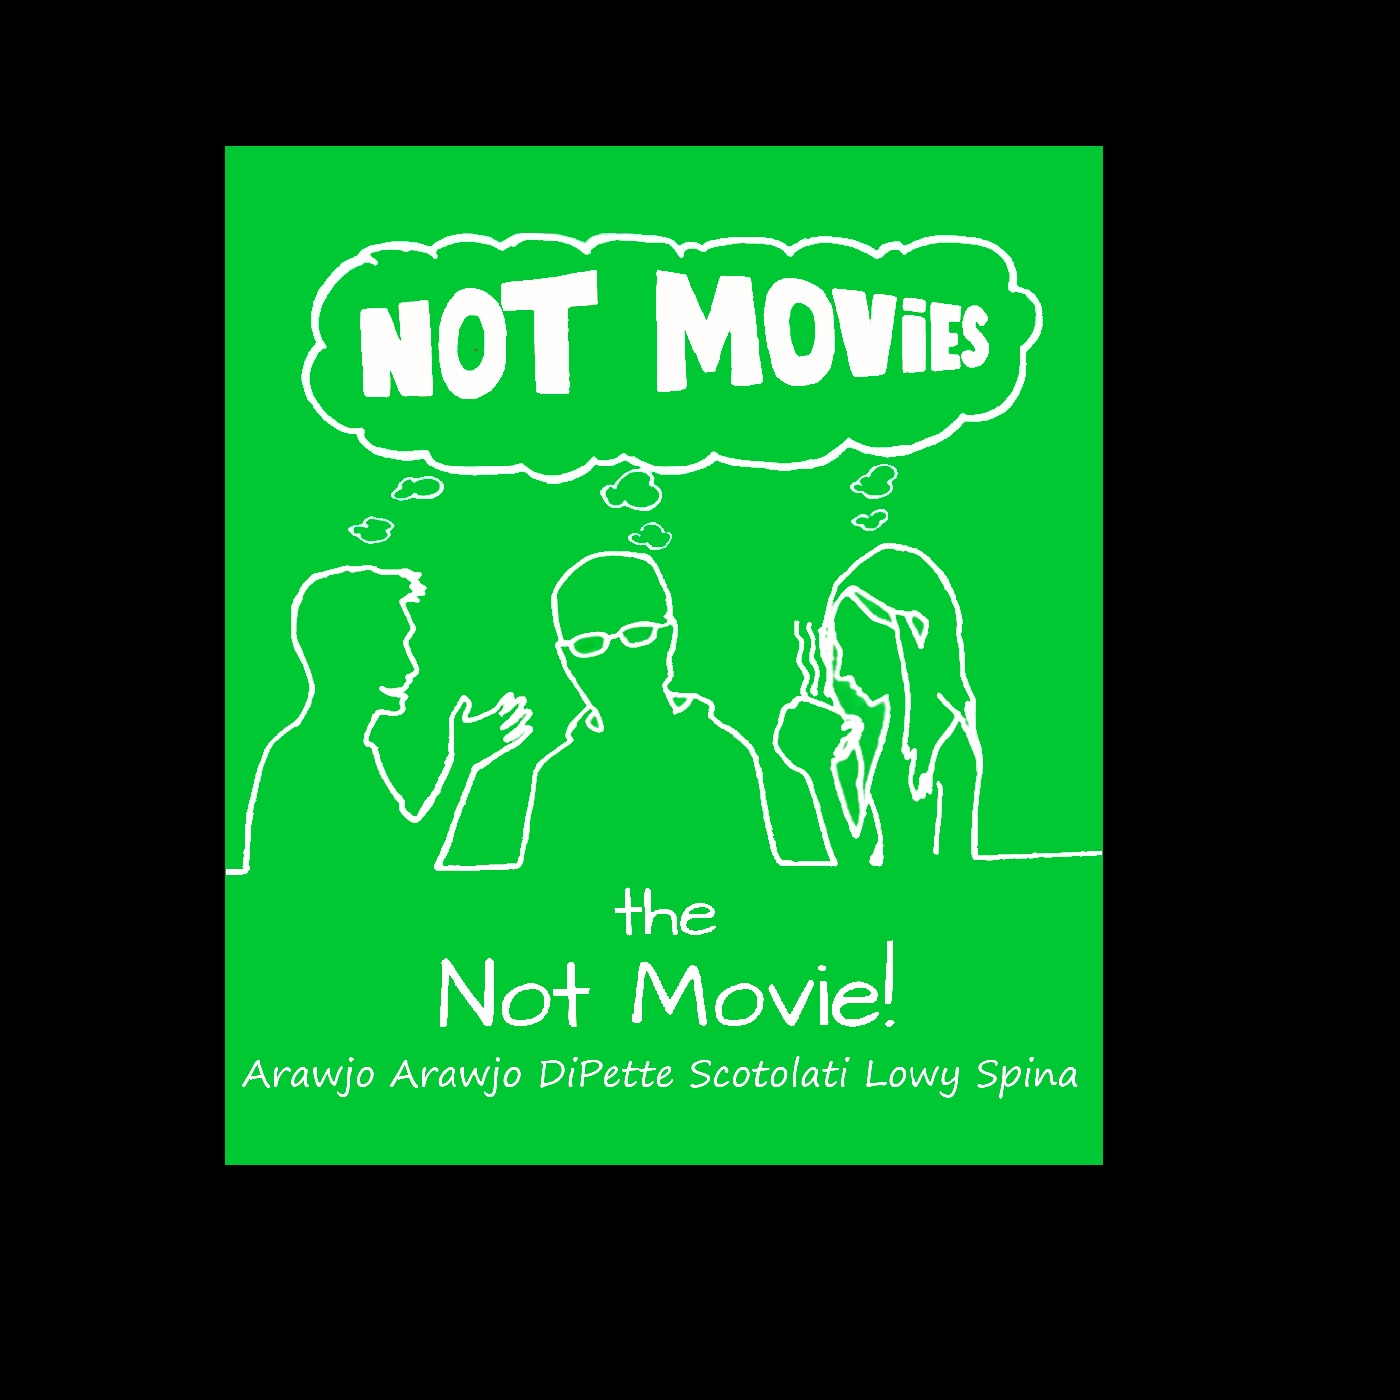 Episode 14 - Not Movies, the Not Movie feat. Ben DiPette